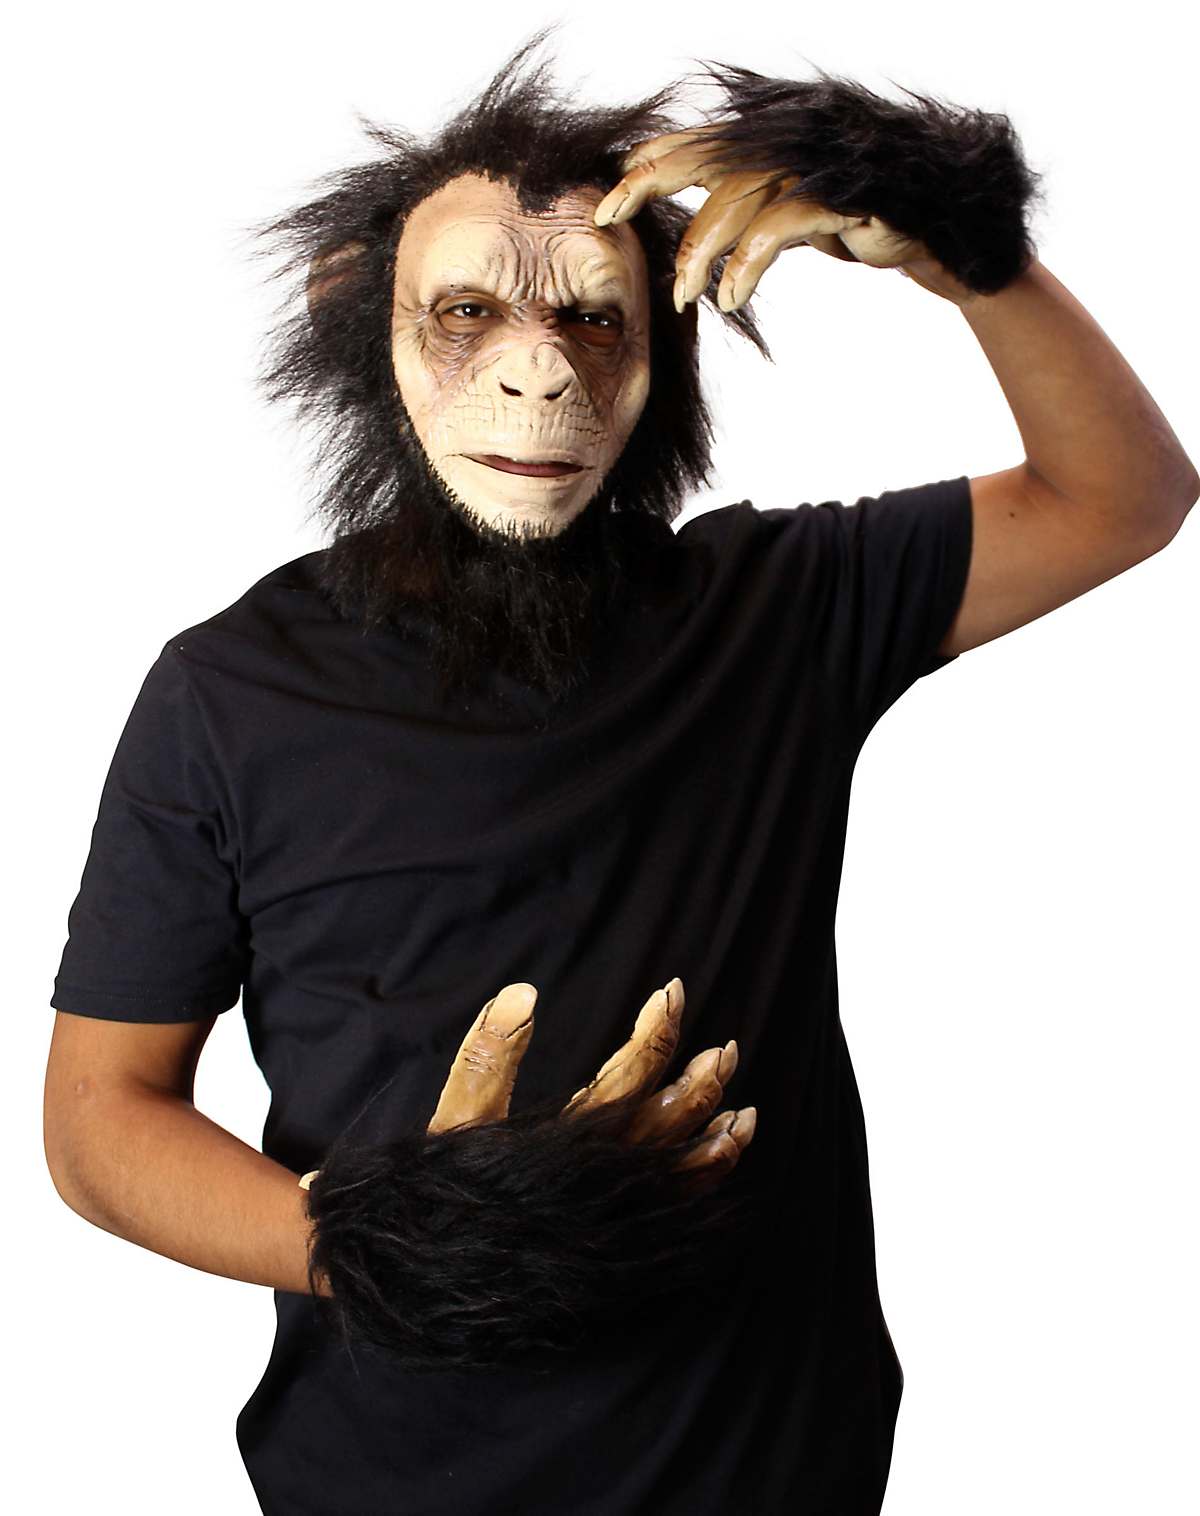 Chimp Half Mask with Hands